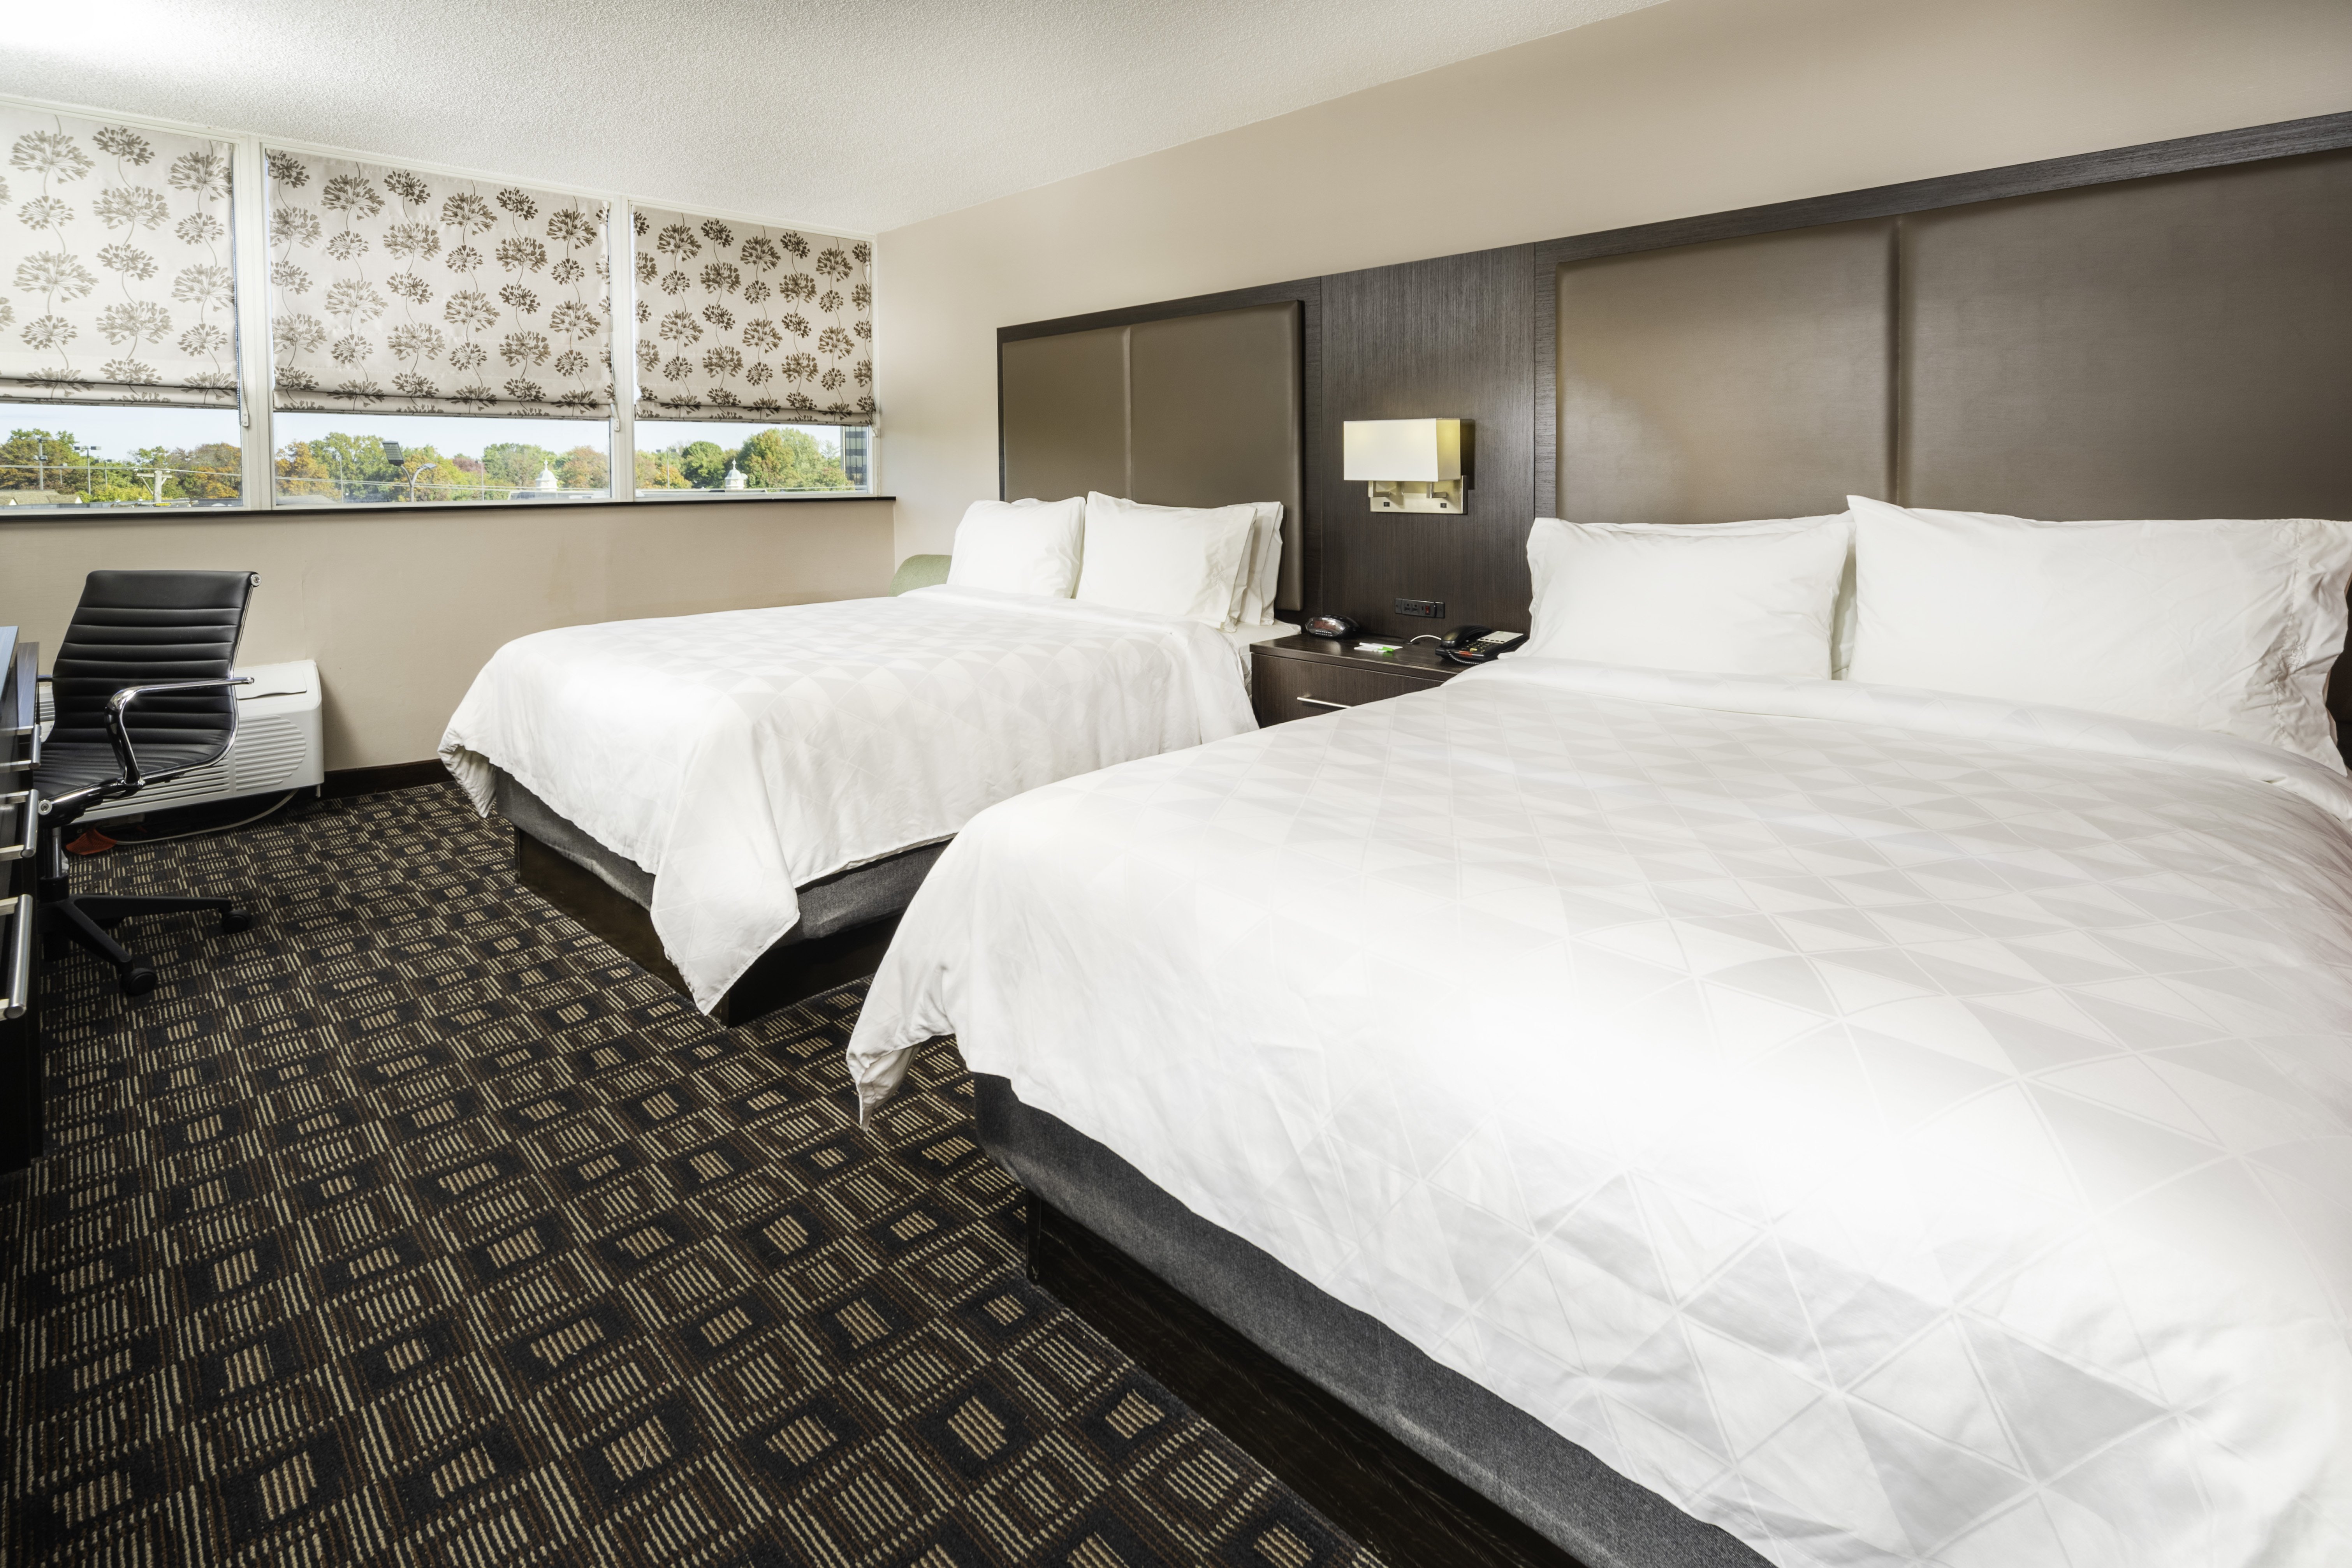 Our Two Queen Beds room is complete with housekeeping services.